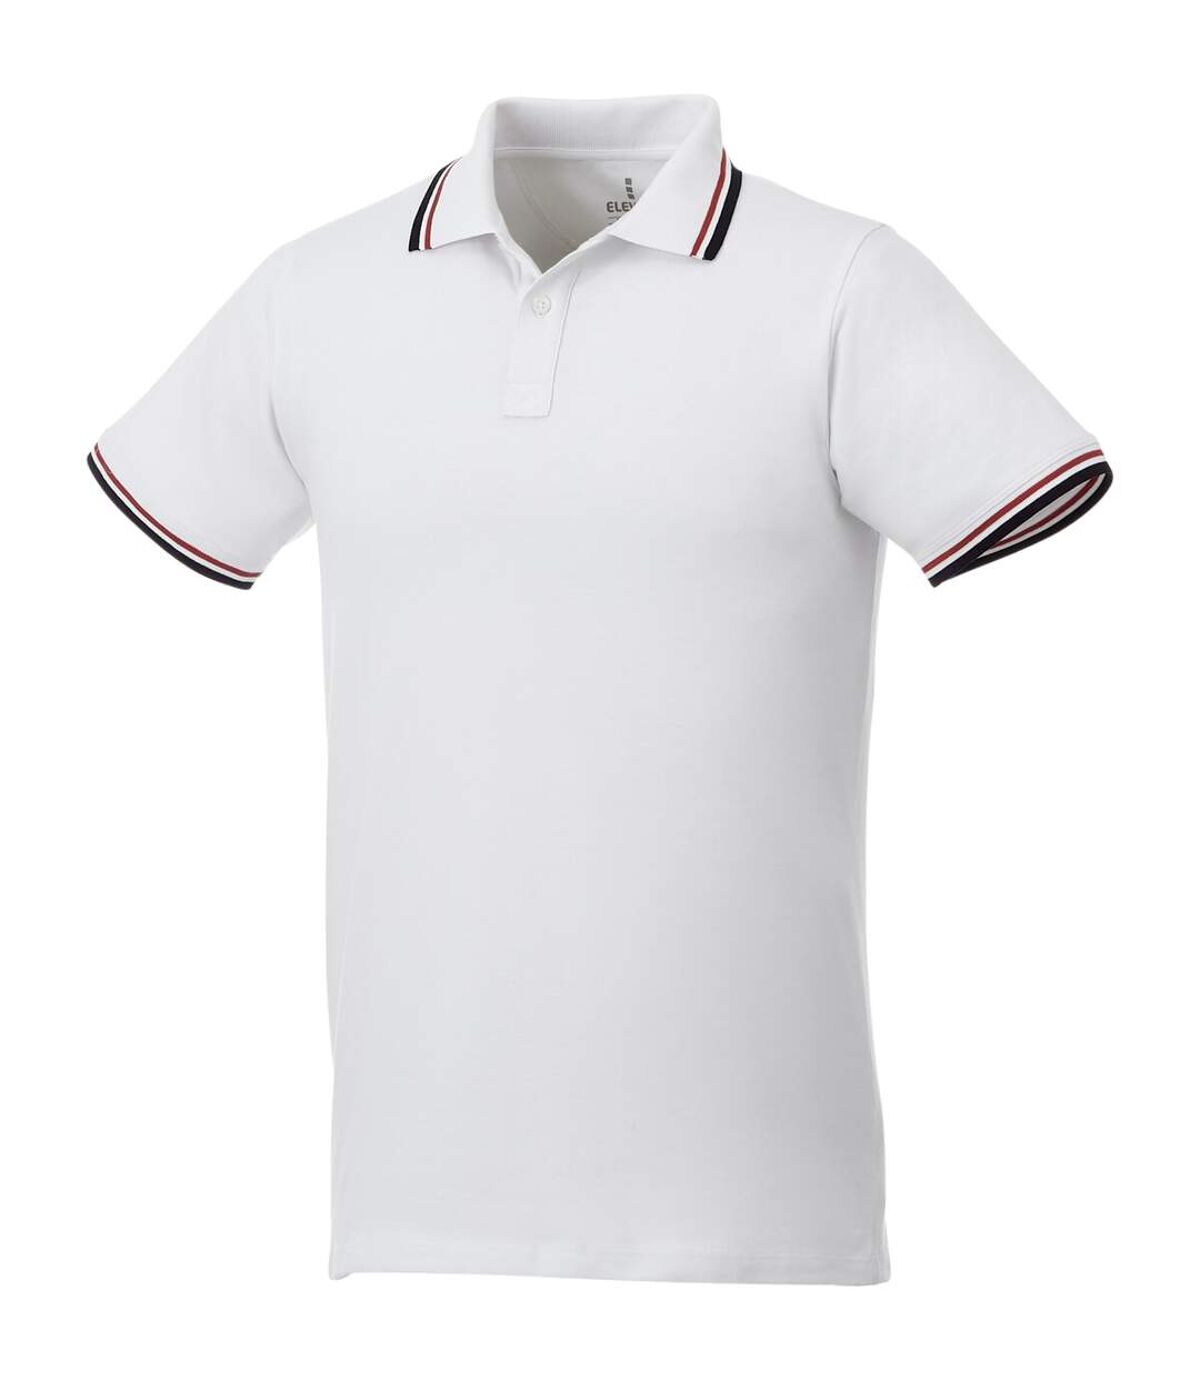 Elevate Mens Fairfield Polo With Tipping (White/Navy/Red) - UTPF2347